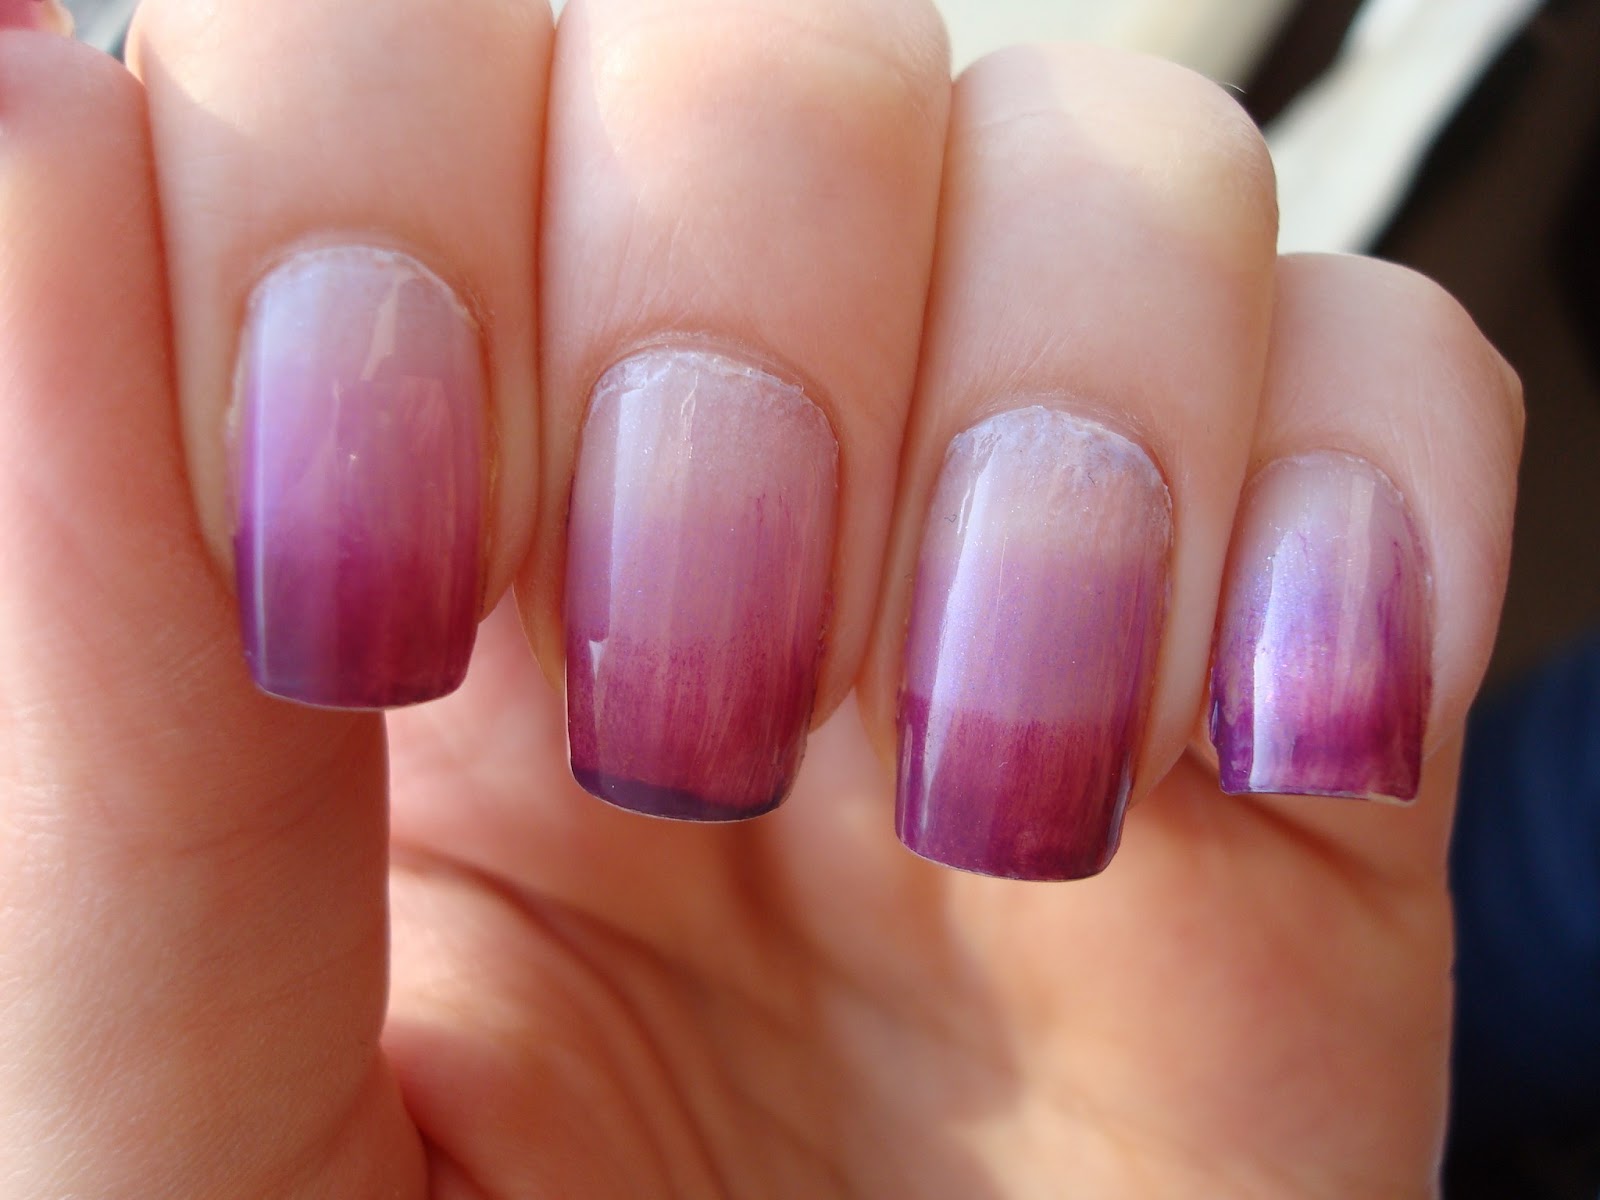 Polished: Purple Ombre nails.